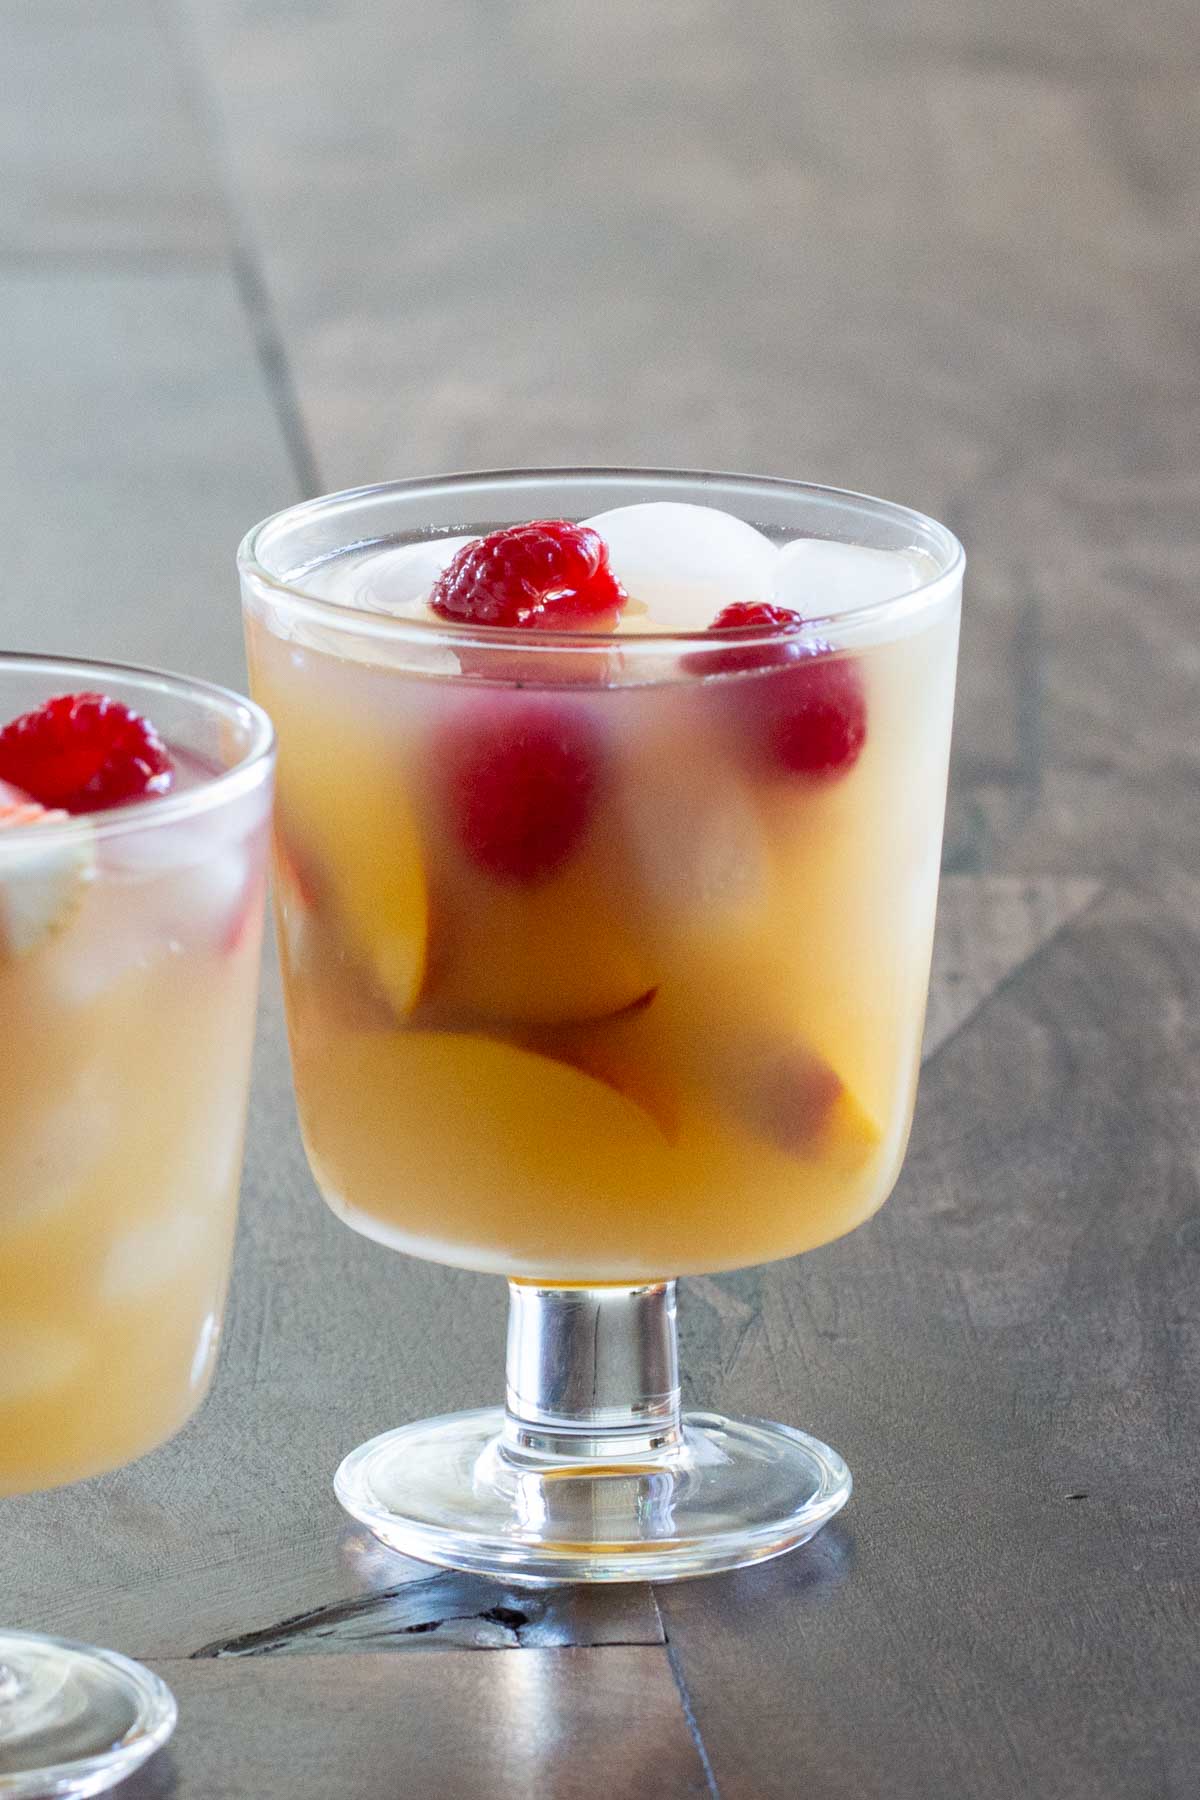 A glass of sangria with diced fruit and red cherries, served on a smooth surface.